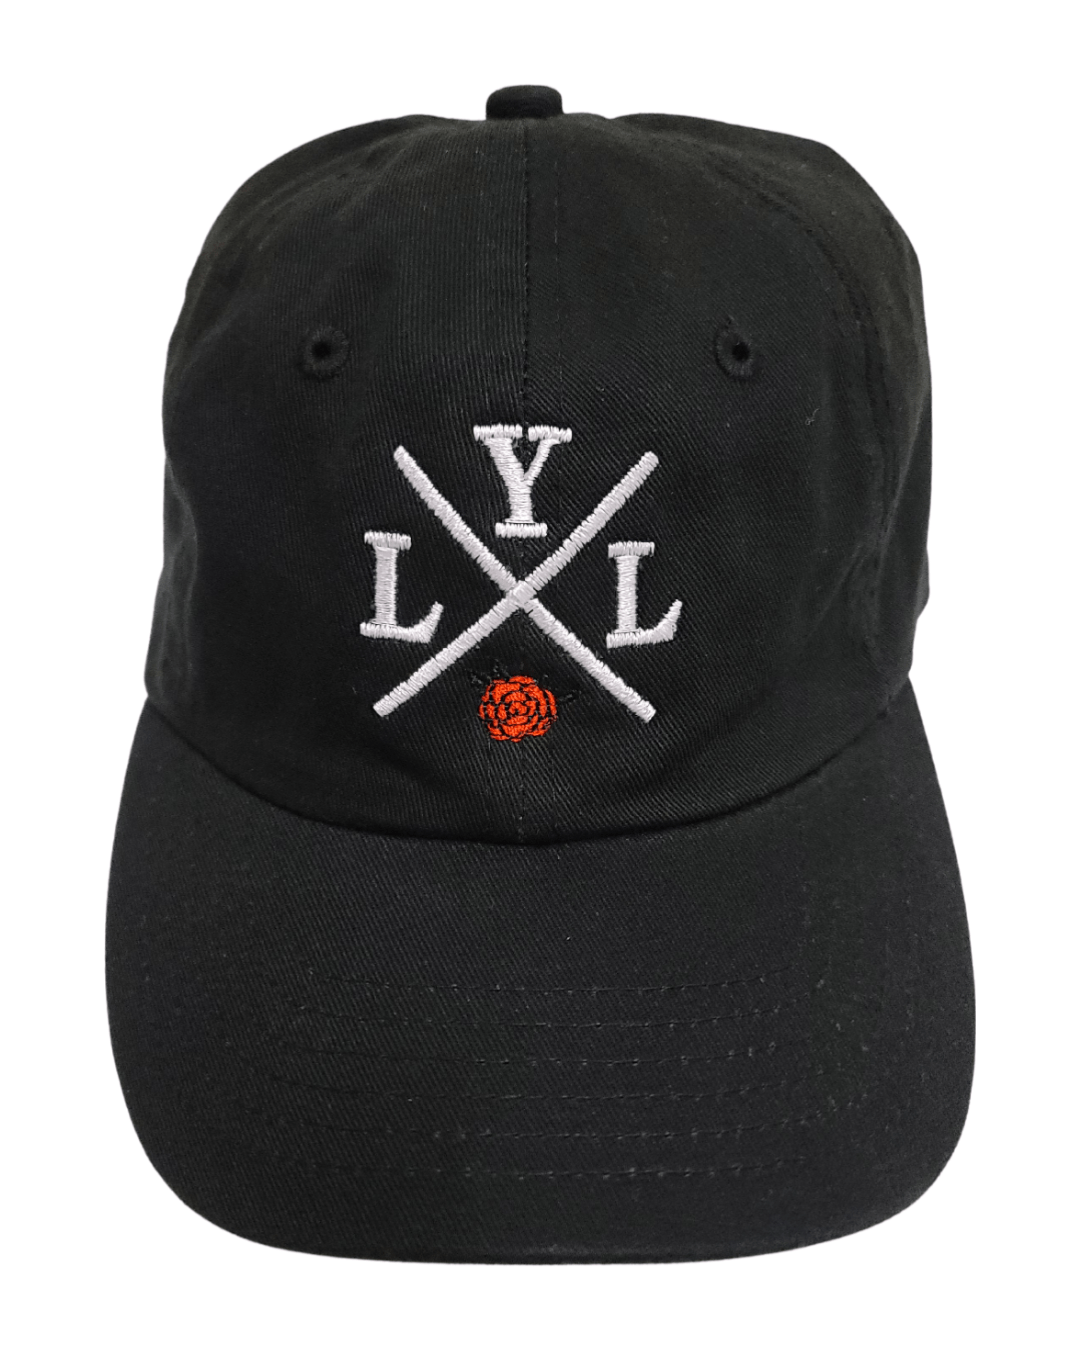 Youth LyL Dad Hats - Leave Your Legacy Clothing